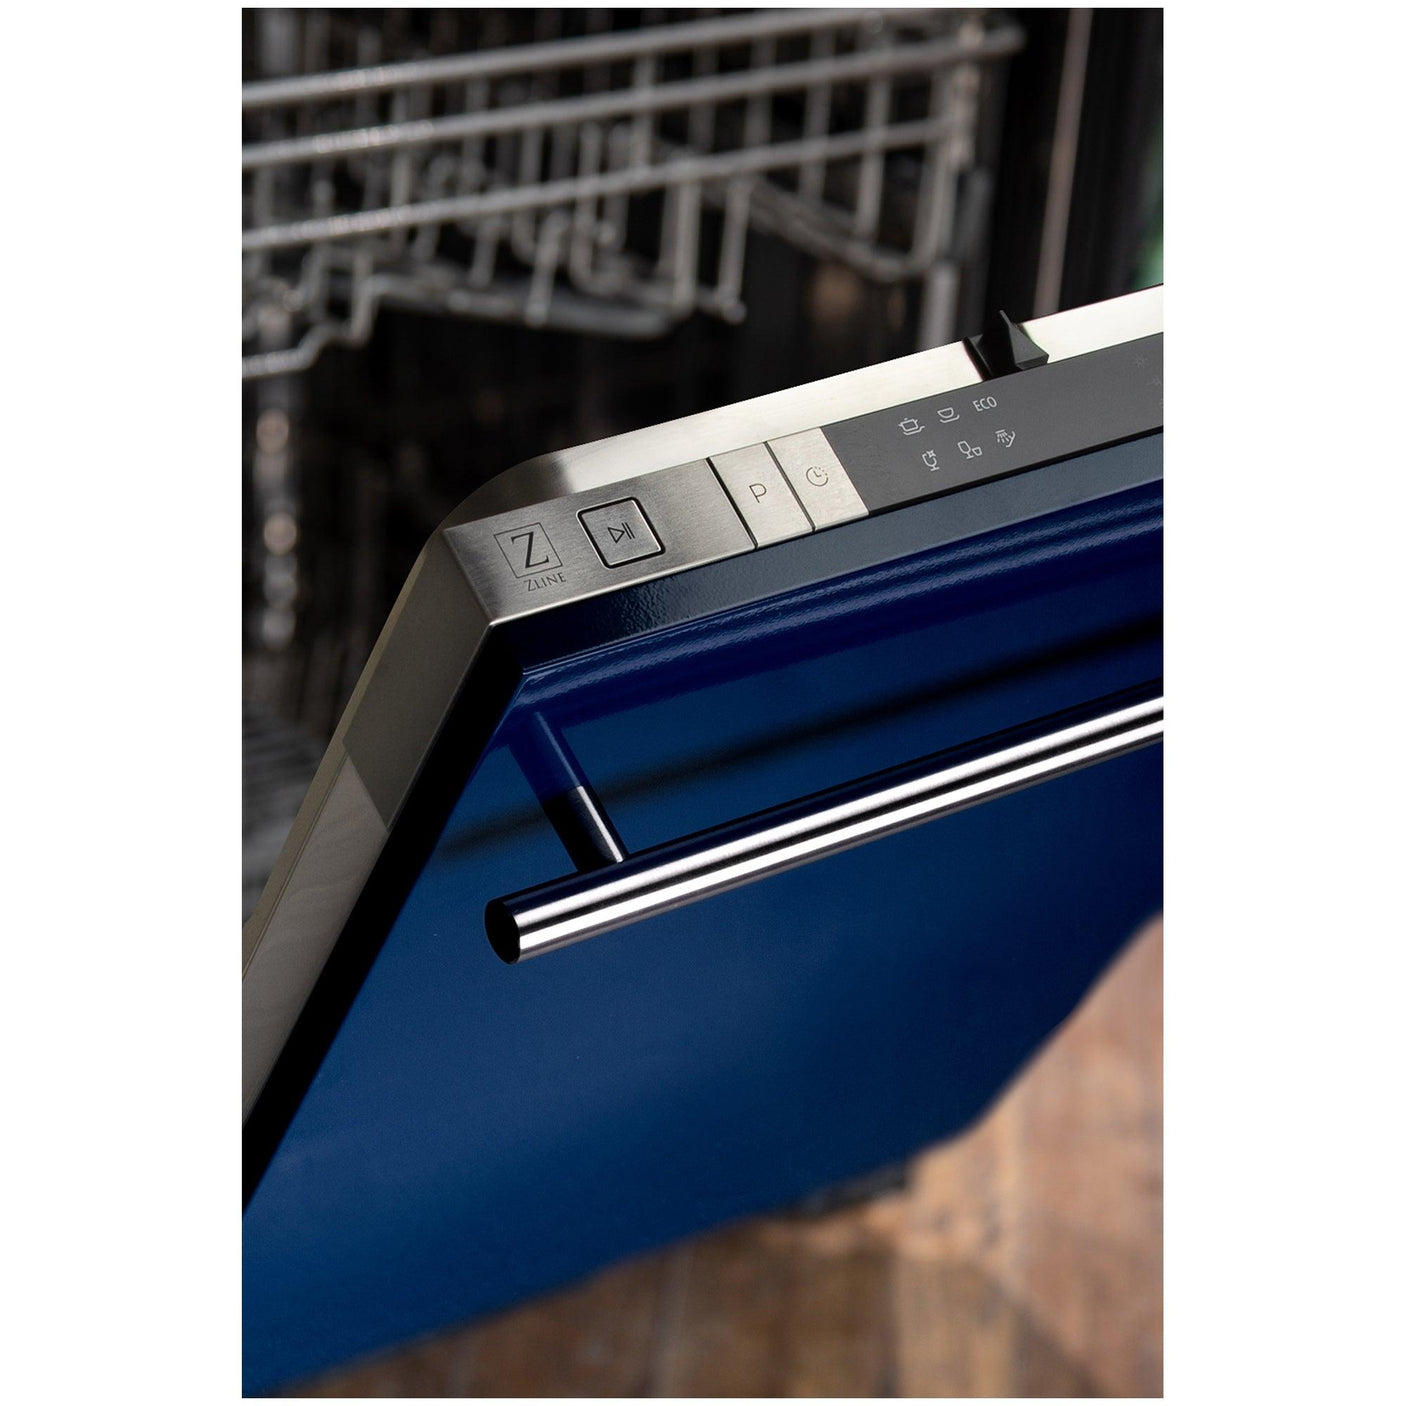 ZLINE 18 in. Compact Top Control Dishwasher with Stainless Steel Tub and Modern Style Handle, 52 dBa (DW-18) [Color: Blue Gloss]